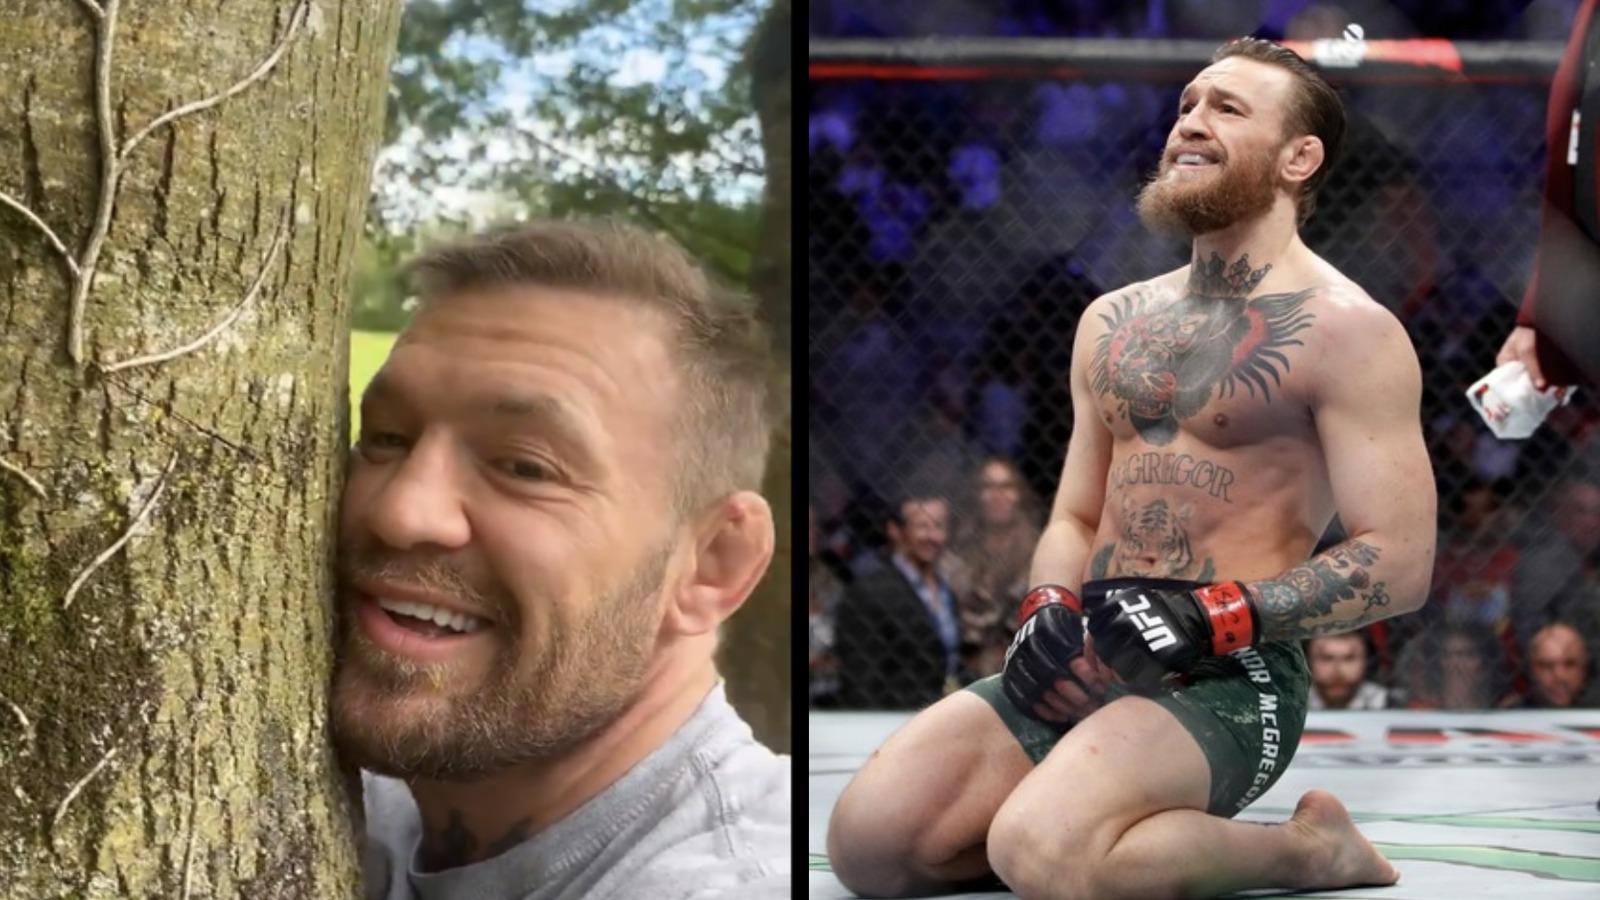 Conor McGregor has introduced a new and bizarre training method ahead of UFC 303